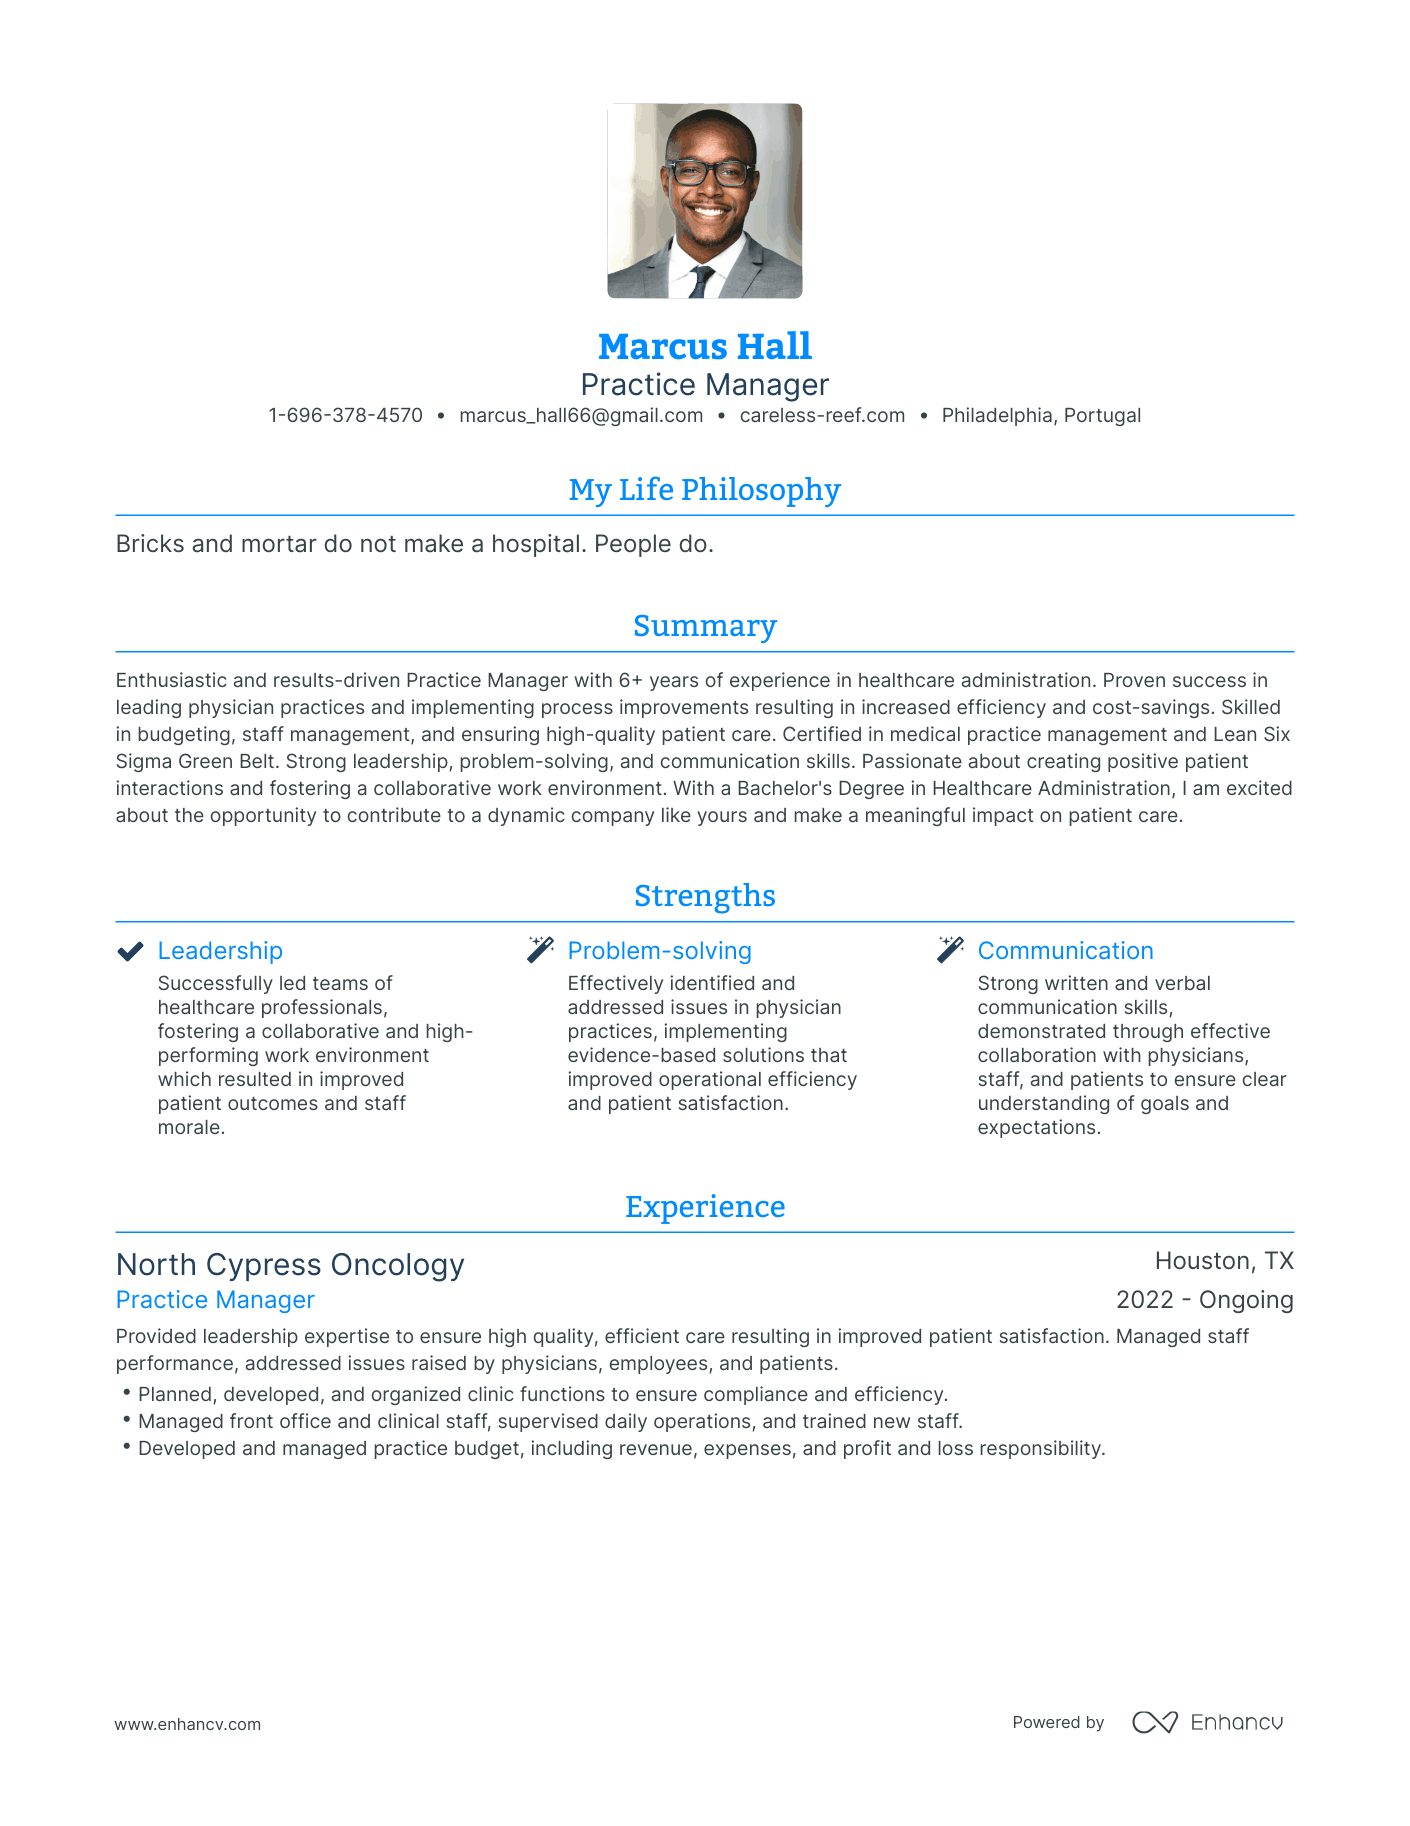 Modern Practice Manager Resume Example